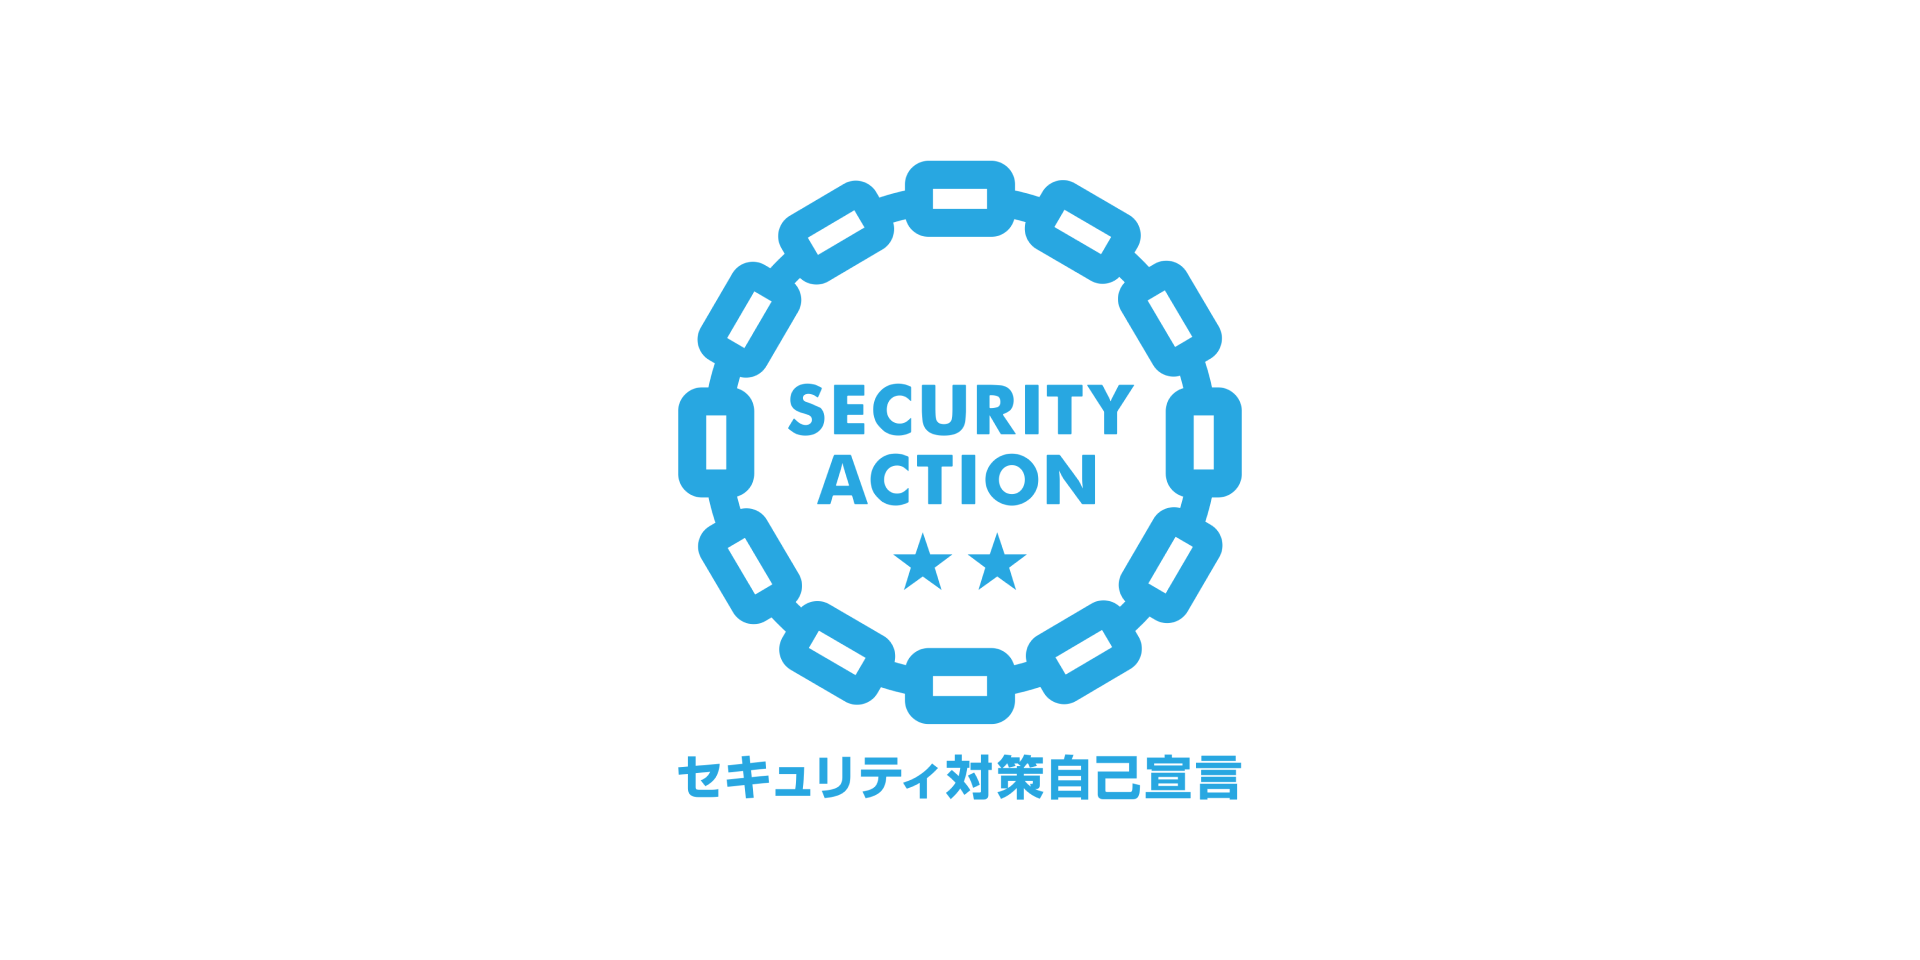 SECURITY ACTION（2つ星）を宣言いたしました。